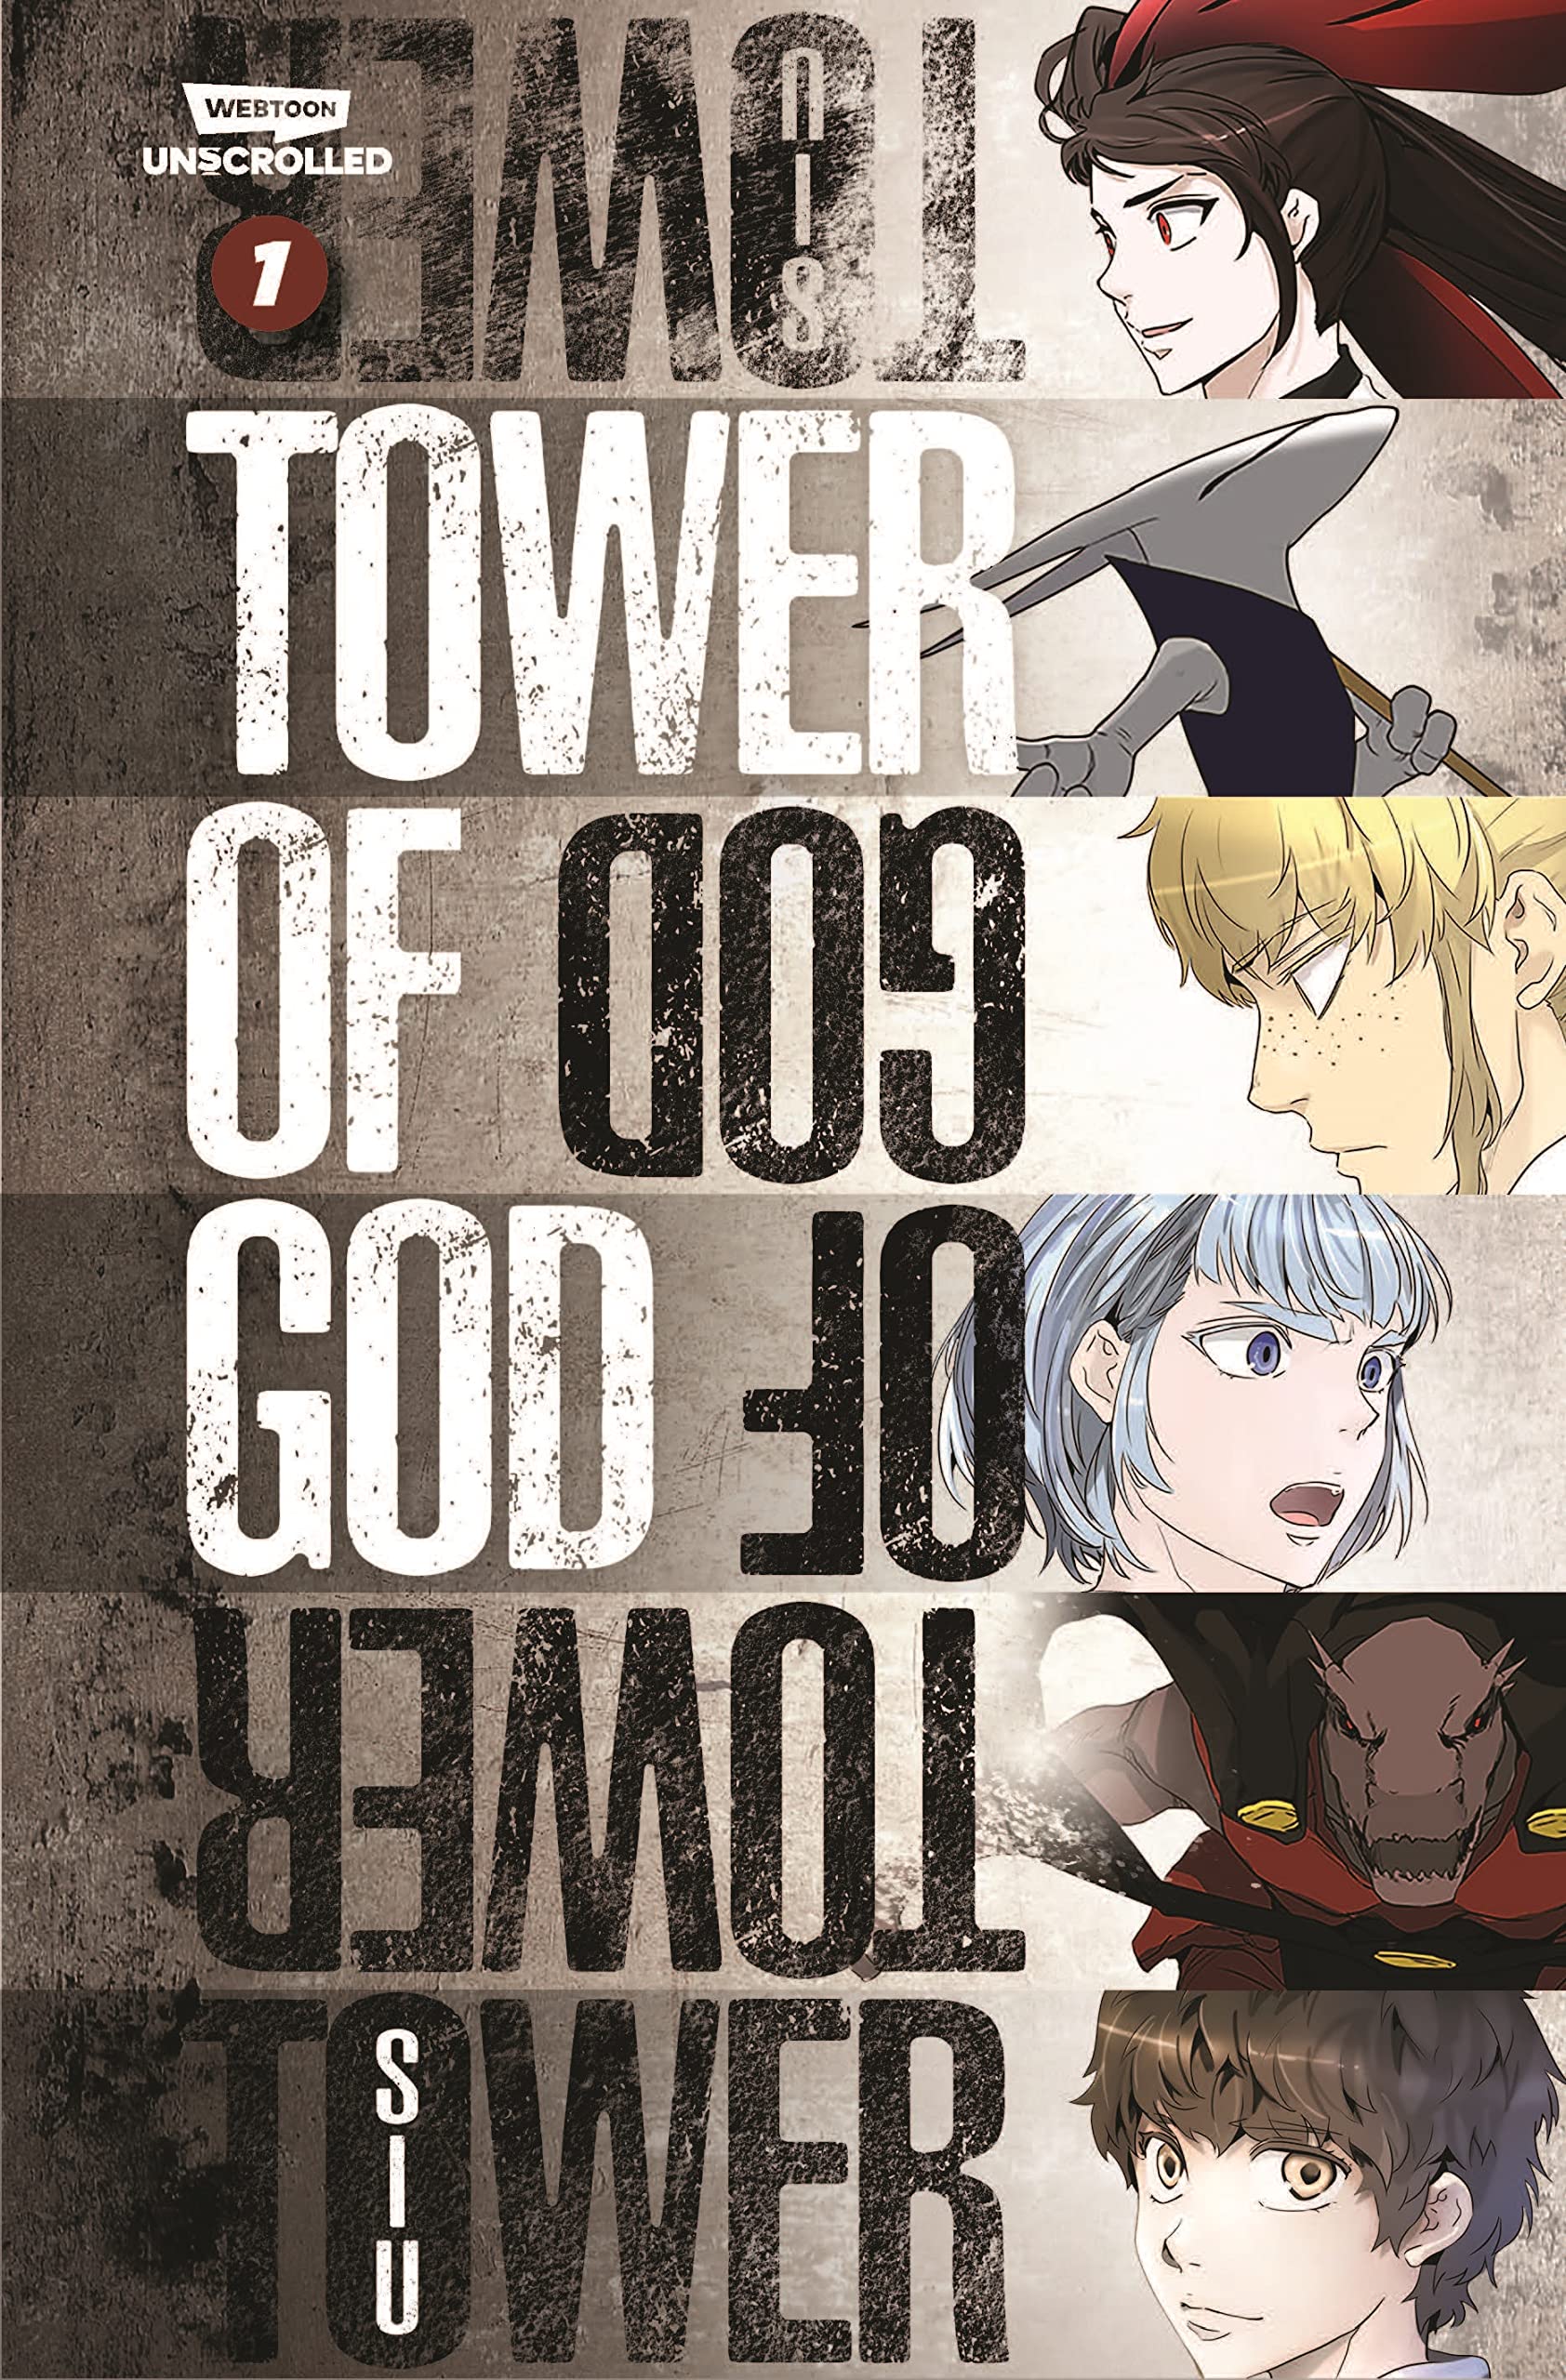 Tower of God Season 1 - watch full episodes streaming online